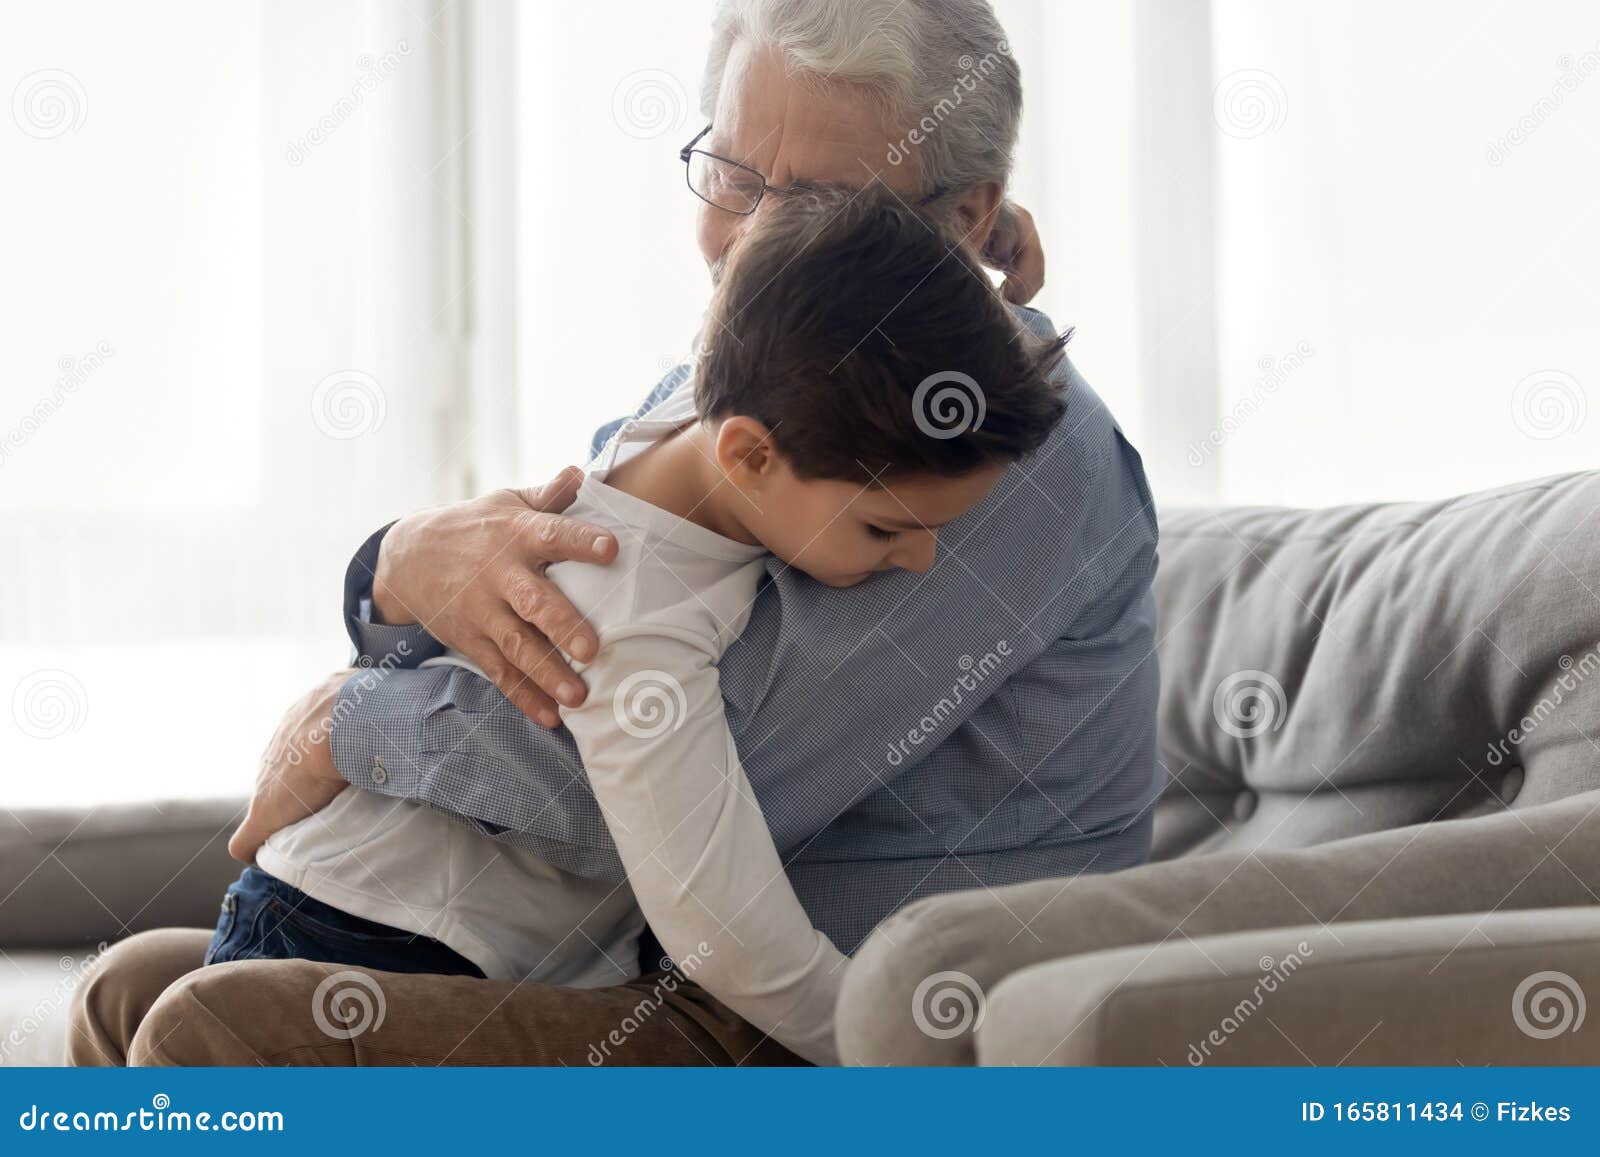 grandfather embraces grandchild enjoy moment of caress and tenderness